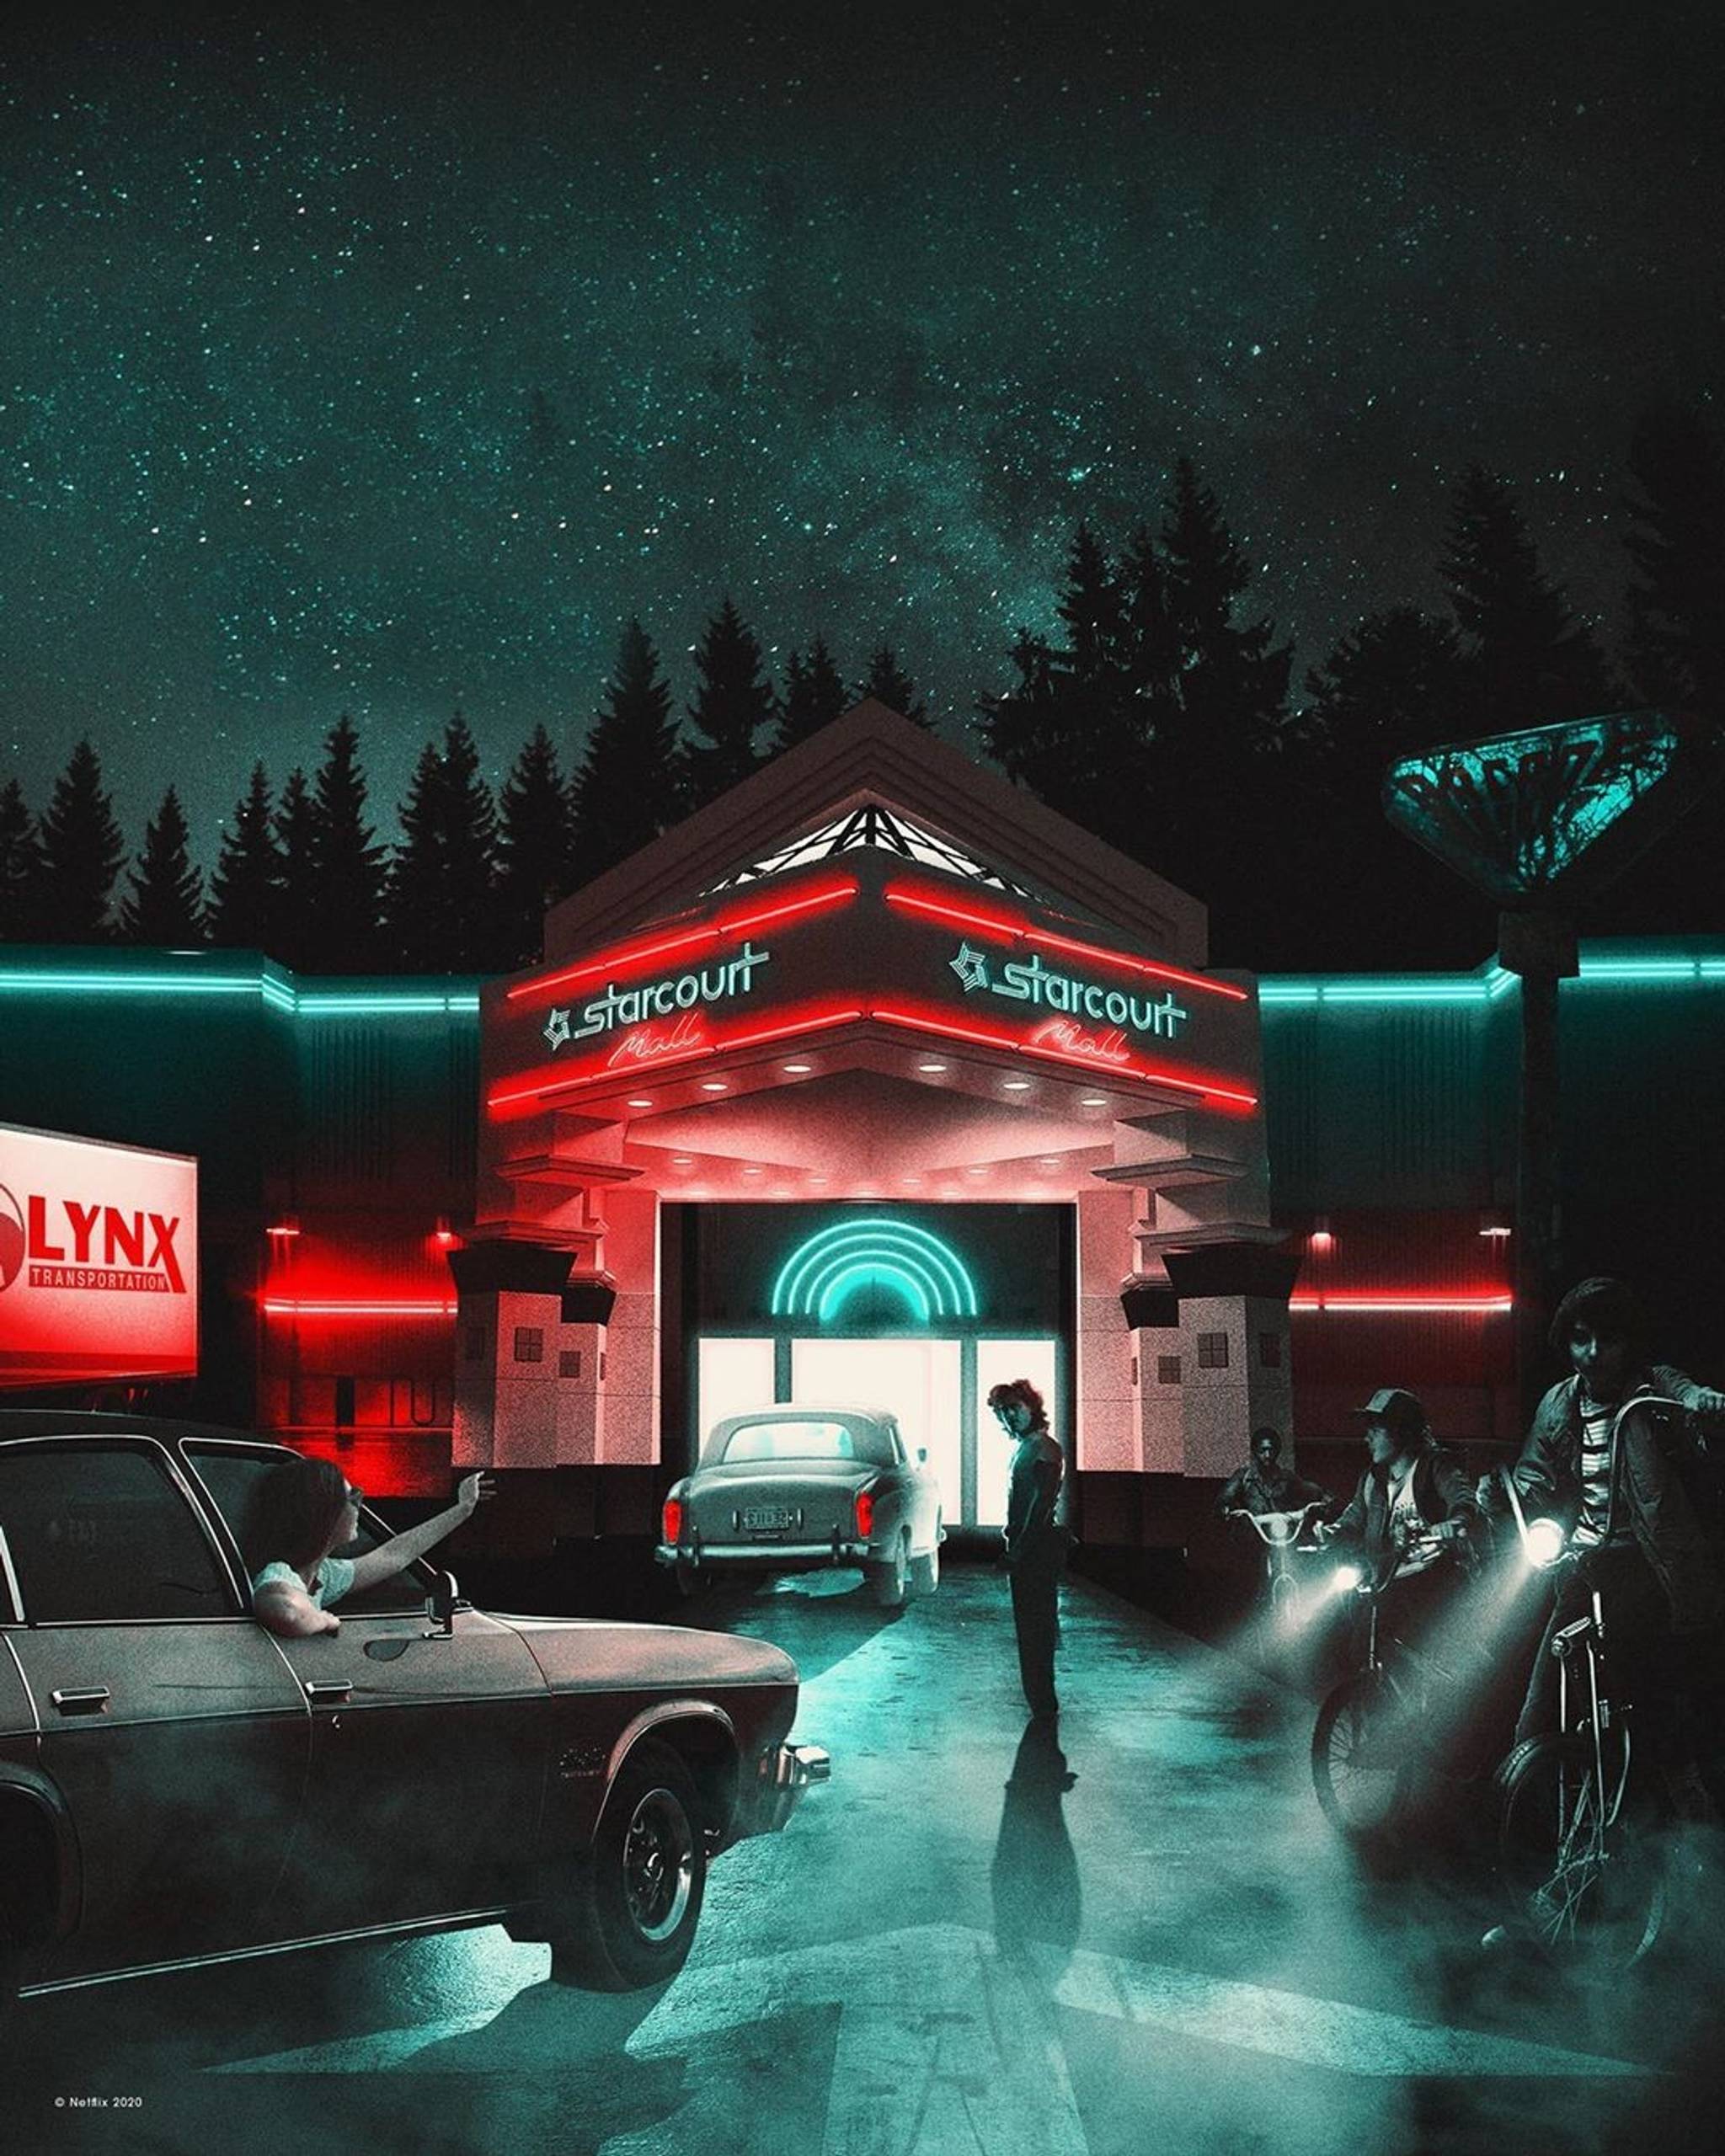 Netflix drive-in event brings 'Stranger Things' to life